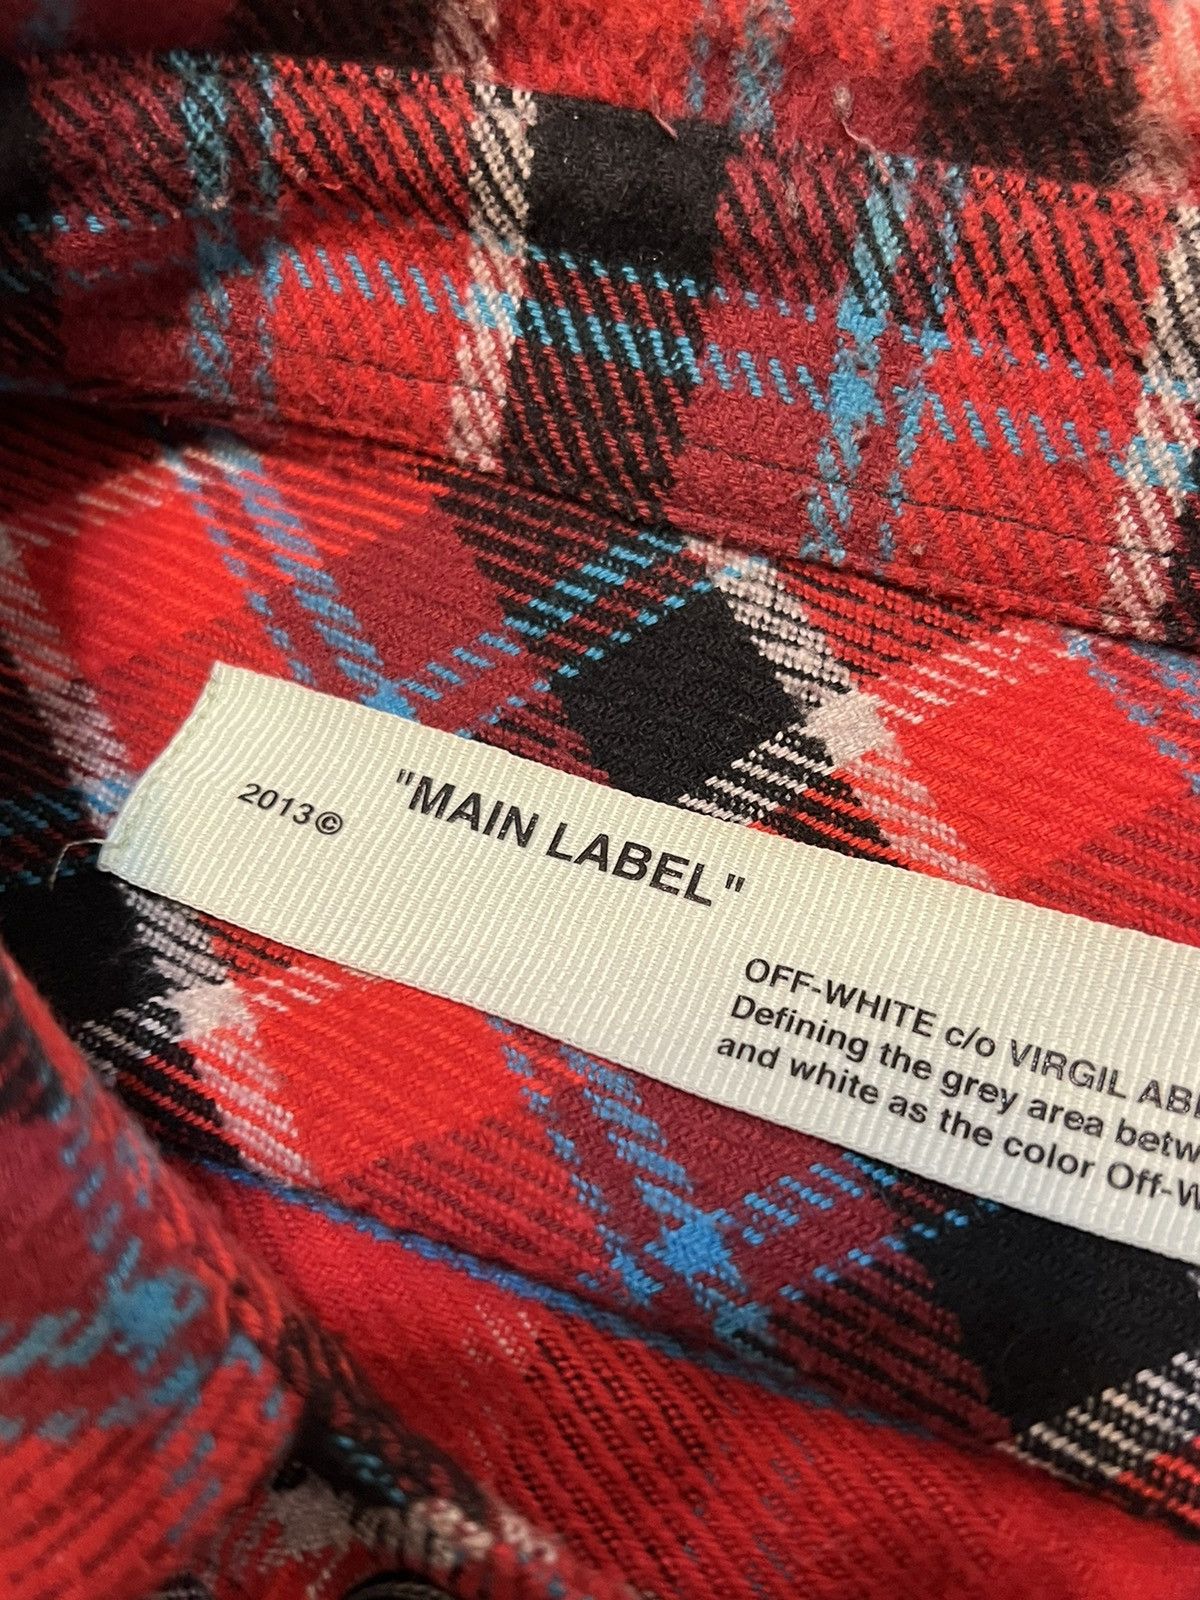 Off-White Off-White Red Check Flannel Longsleeve Size US M / EU 48-50 / 2 - 8 Thumbnail